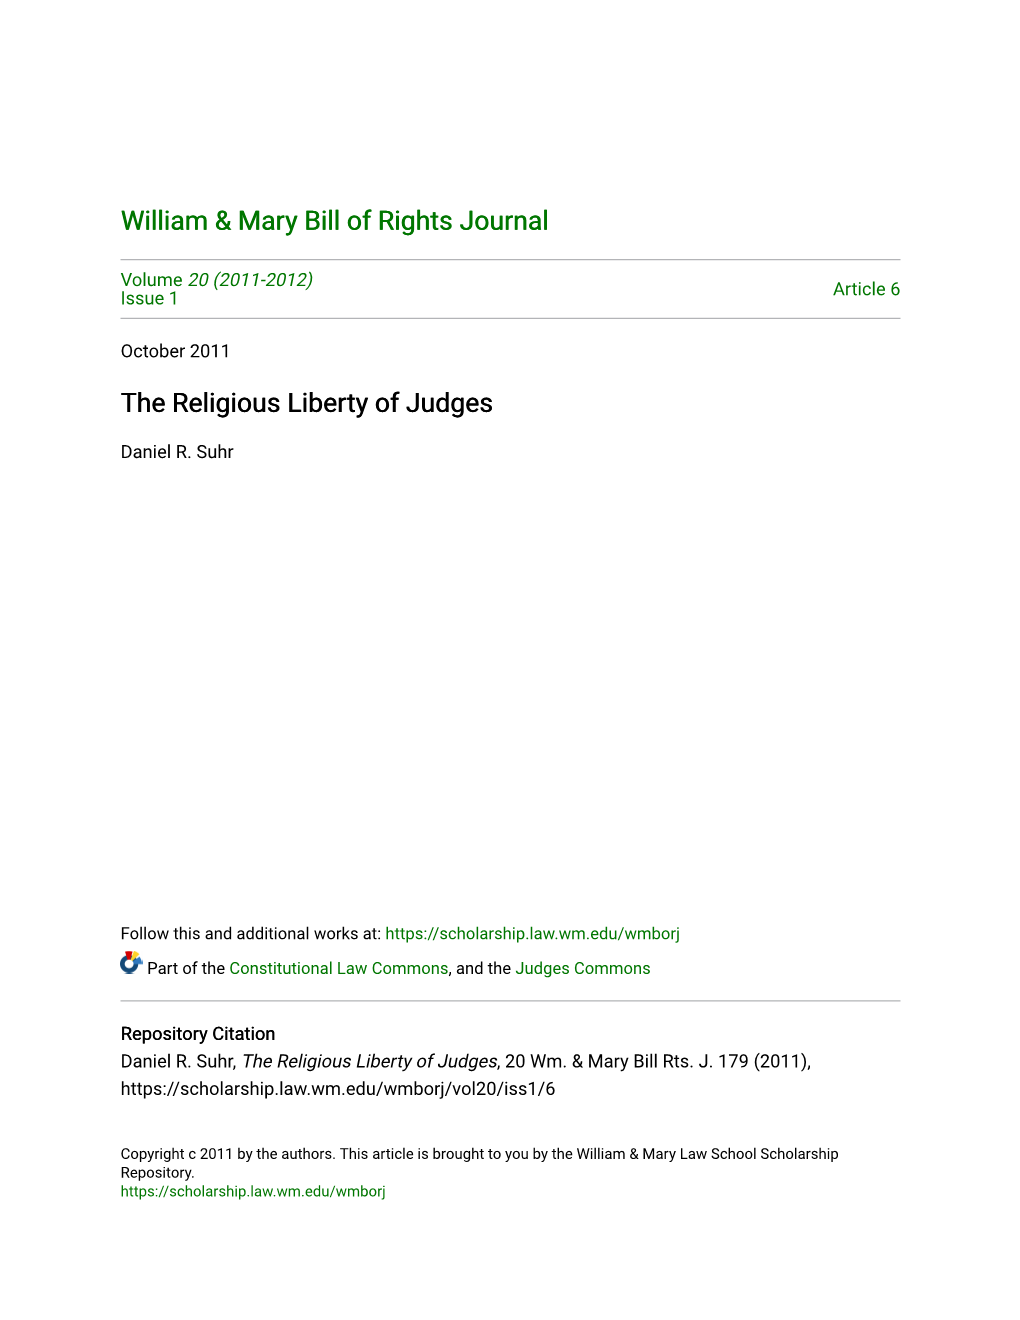 The Religious Liberty of Judges